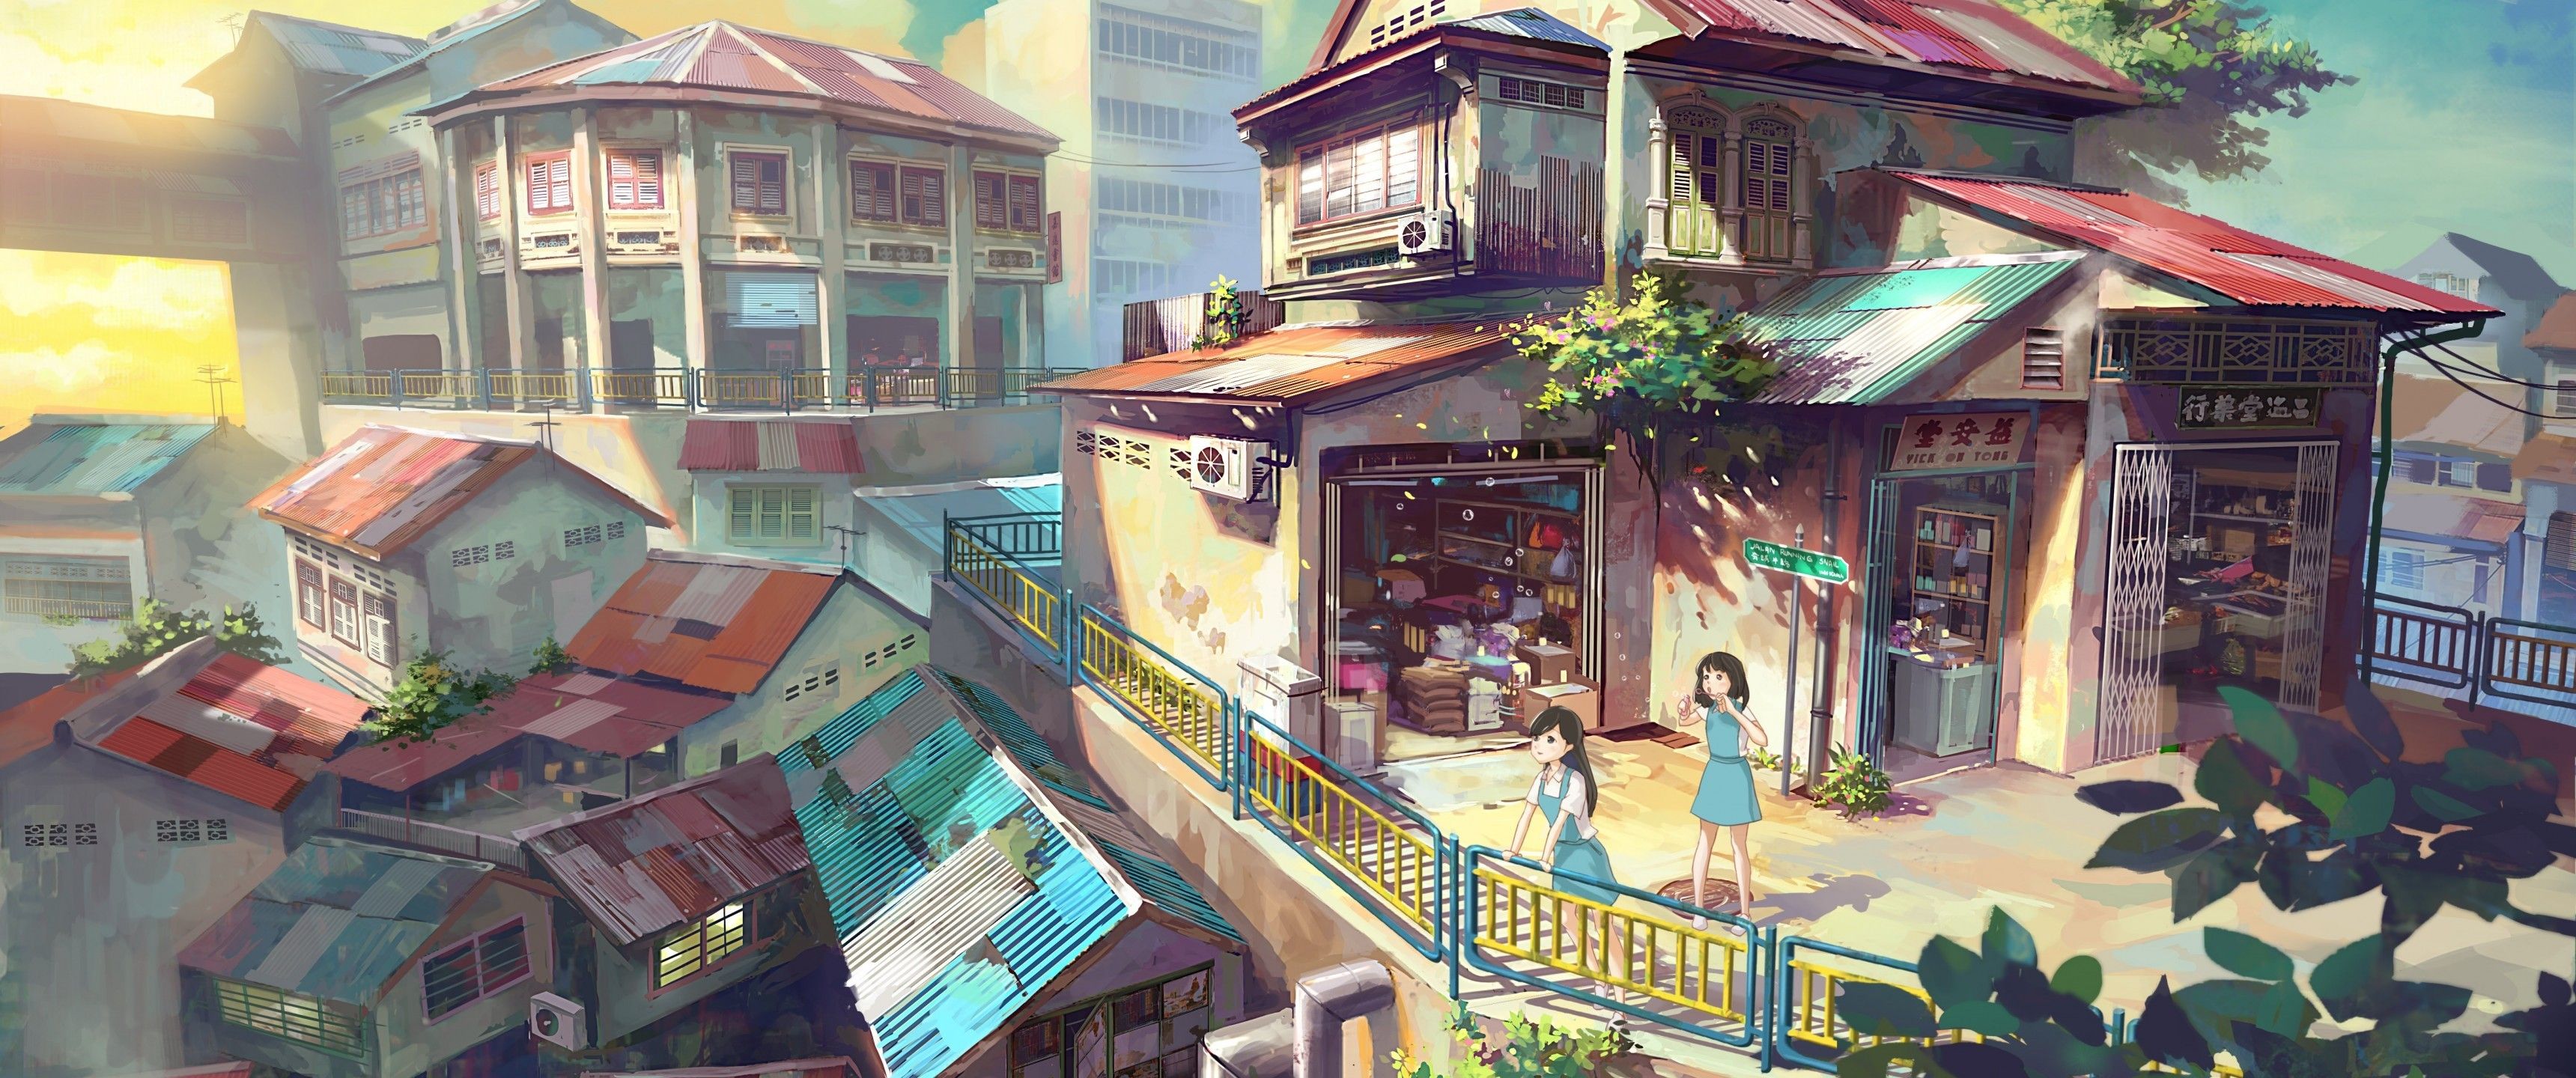 Download 3440x1440 Anime Buildings, Summer, Girls, Clouds, Artwork, Sunset, Scenic Wallpaper